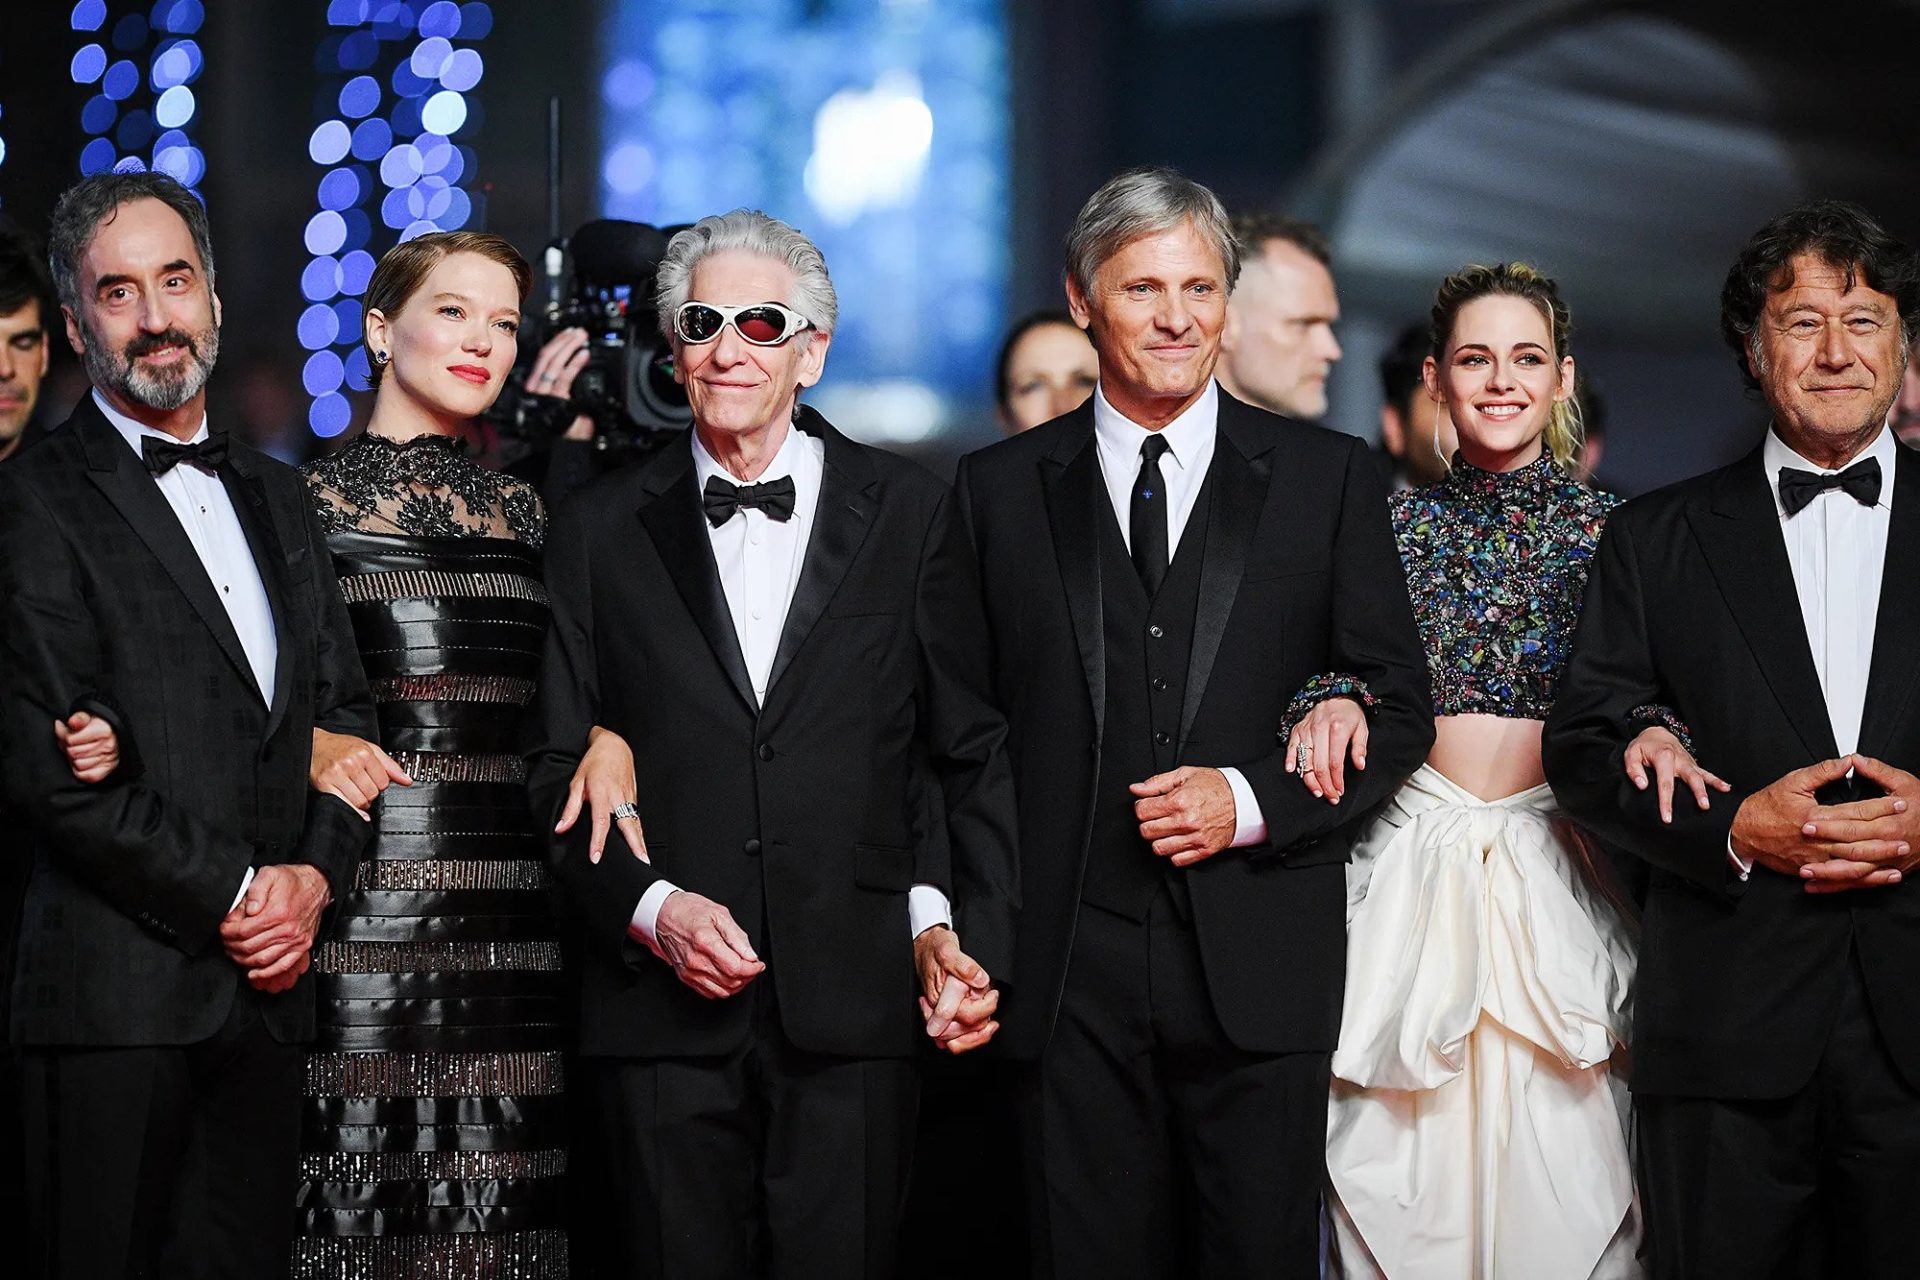 David Cronenberg at Cannes with the cast of Crimes of the Future